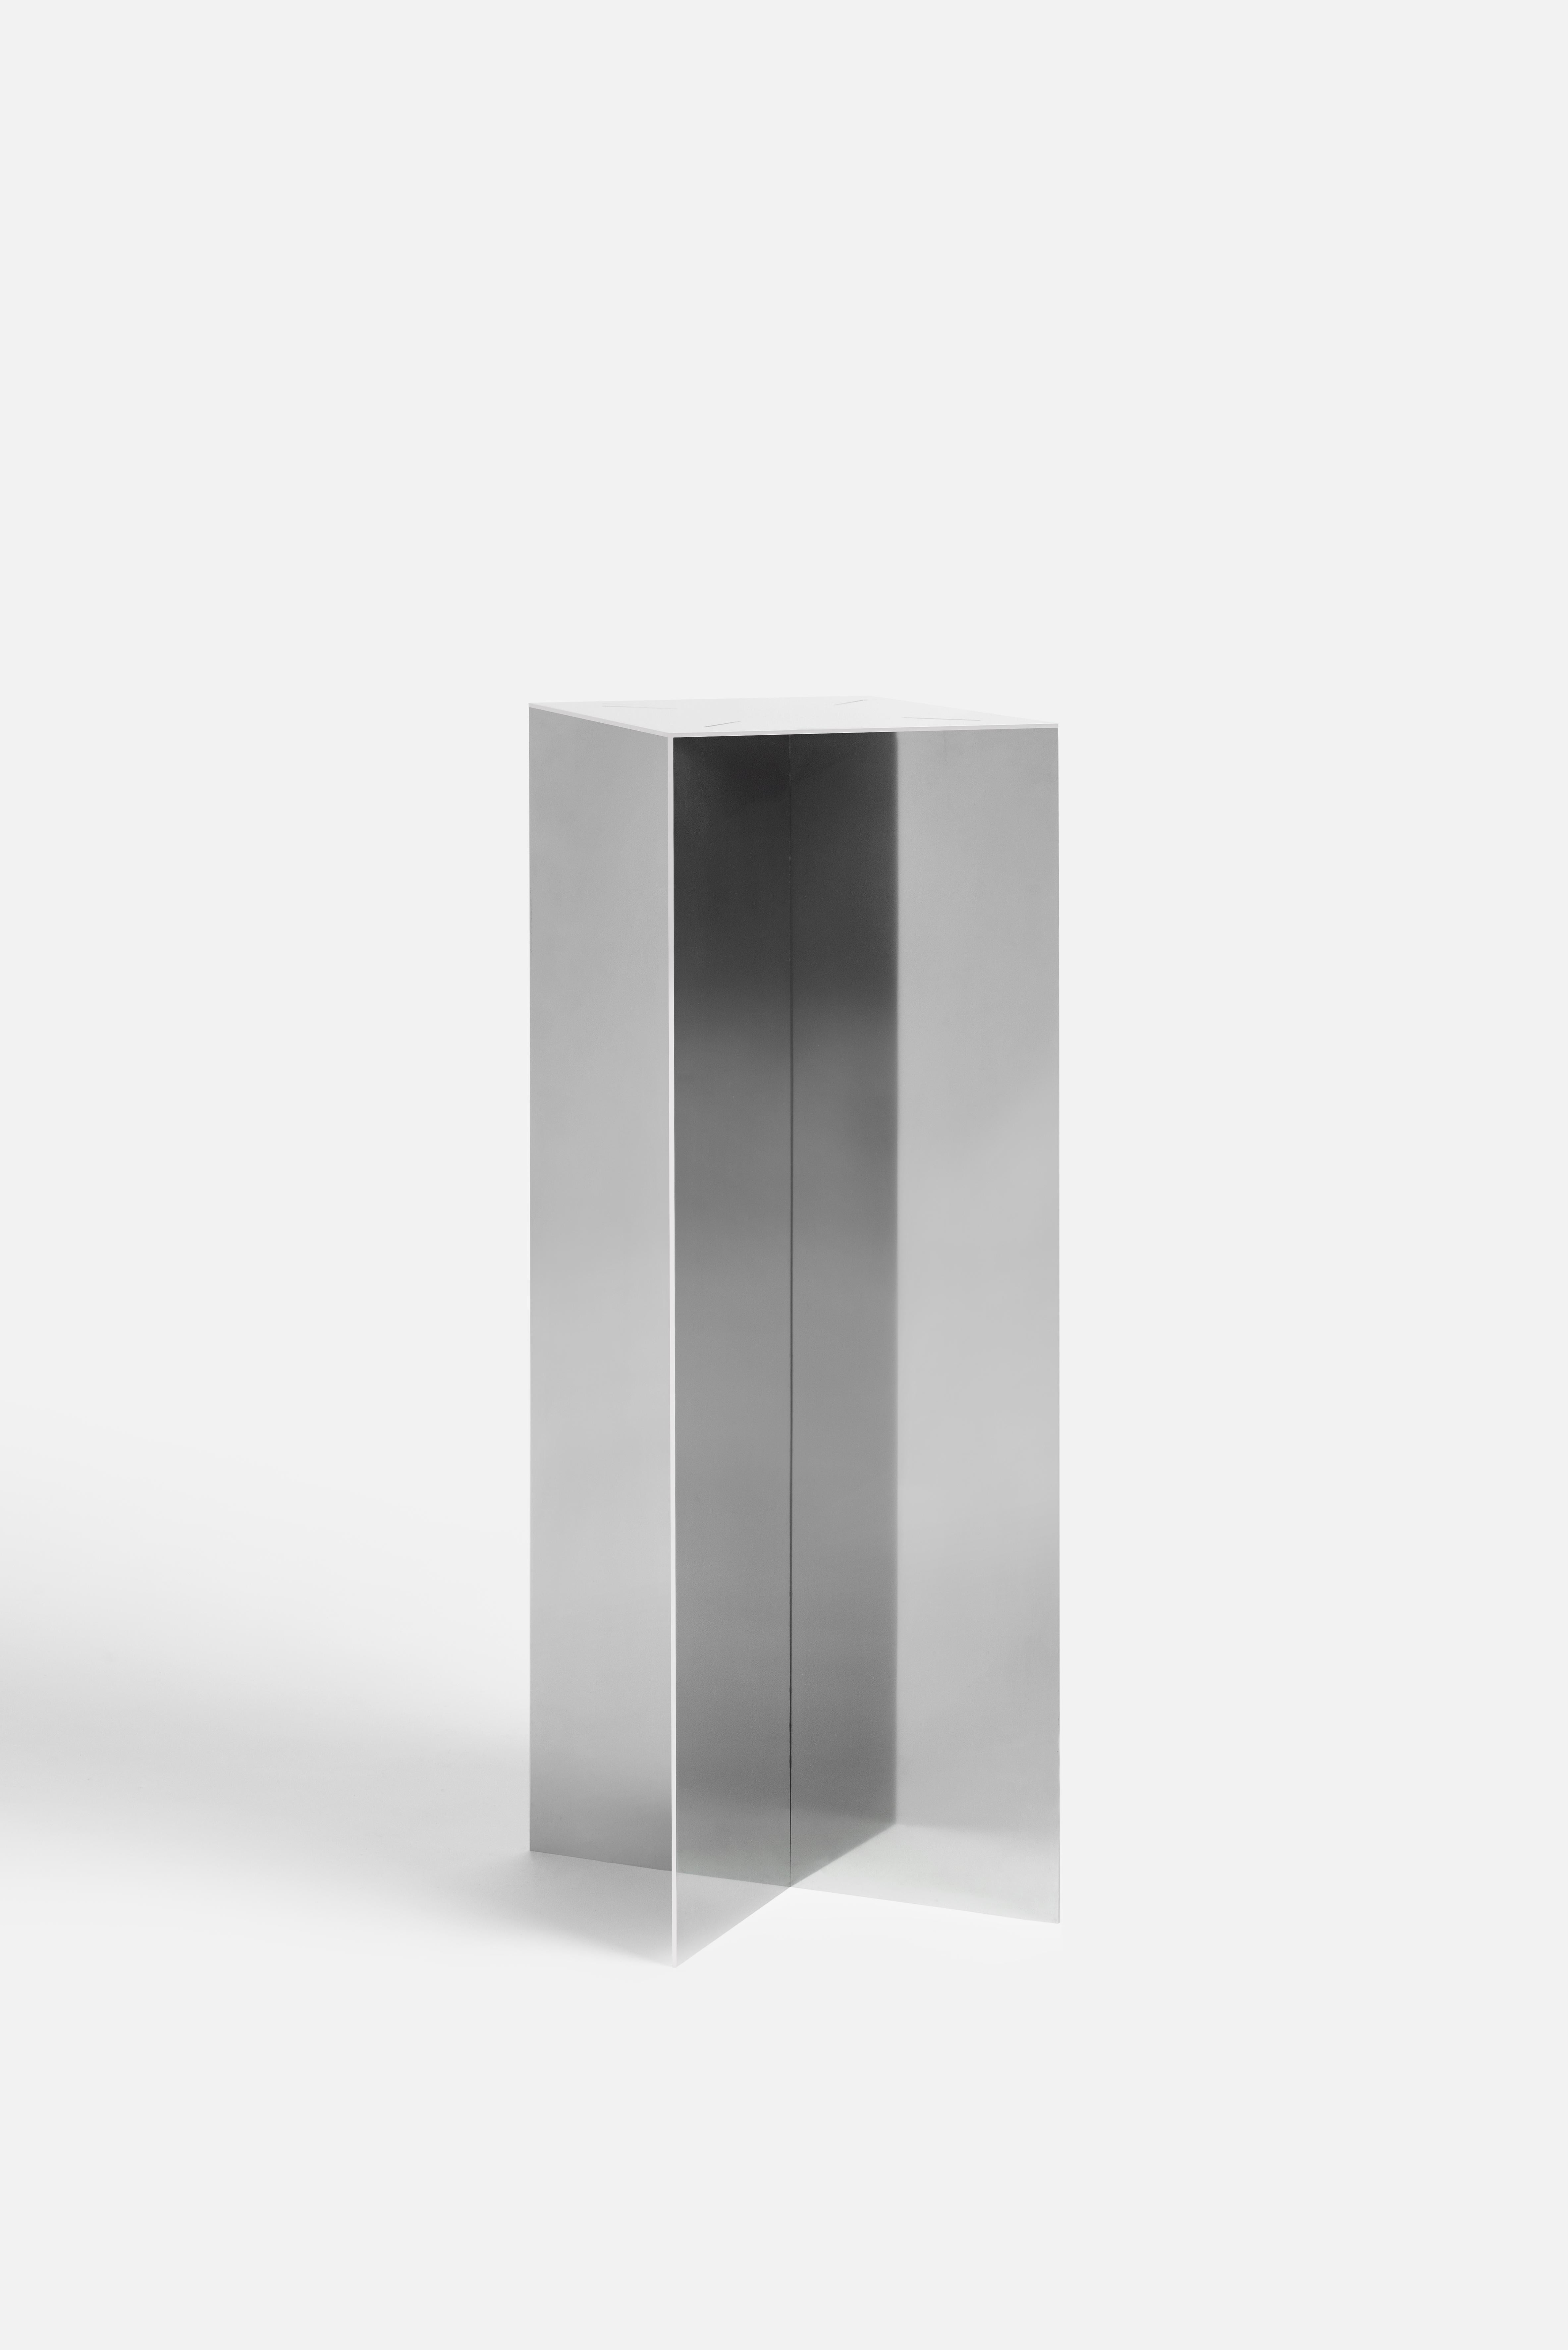 NM03 Podium by NM3
Dimensions: W 30 x D 30 x H 90 cm
Materials: BA stainless steel

3mm stainless steel, dry joint, podium.

NM3 is an office for architecture and design based in Milan run by Nicolò Ornaghi, Delfino Sisto Legnani and Francesco